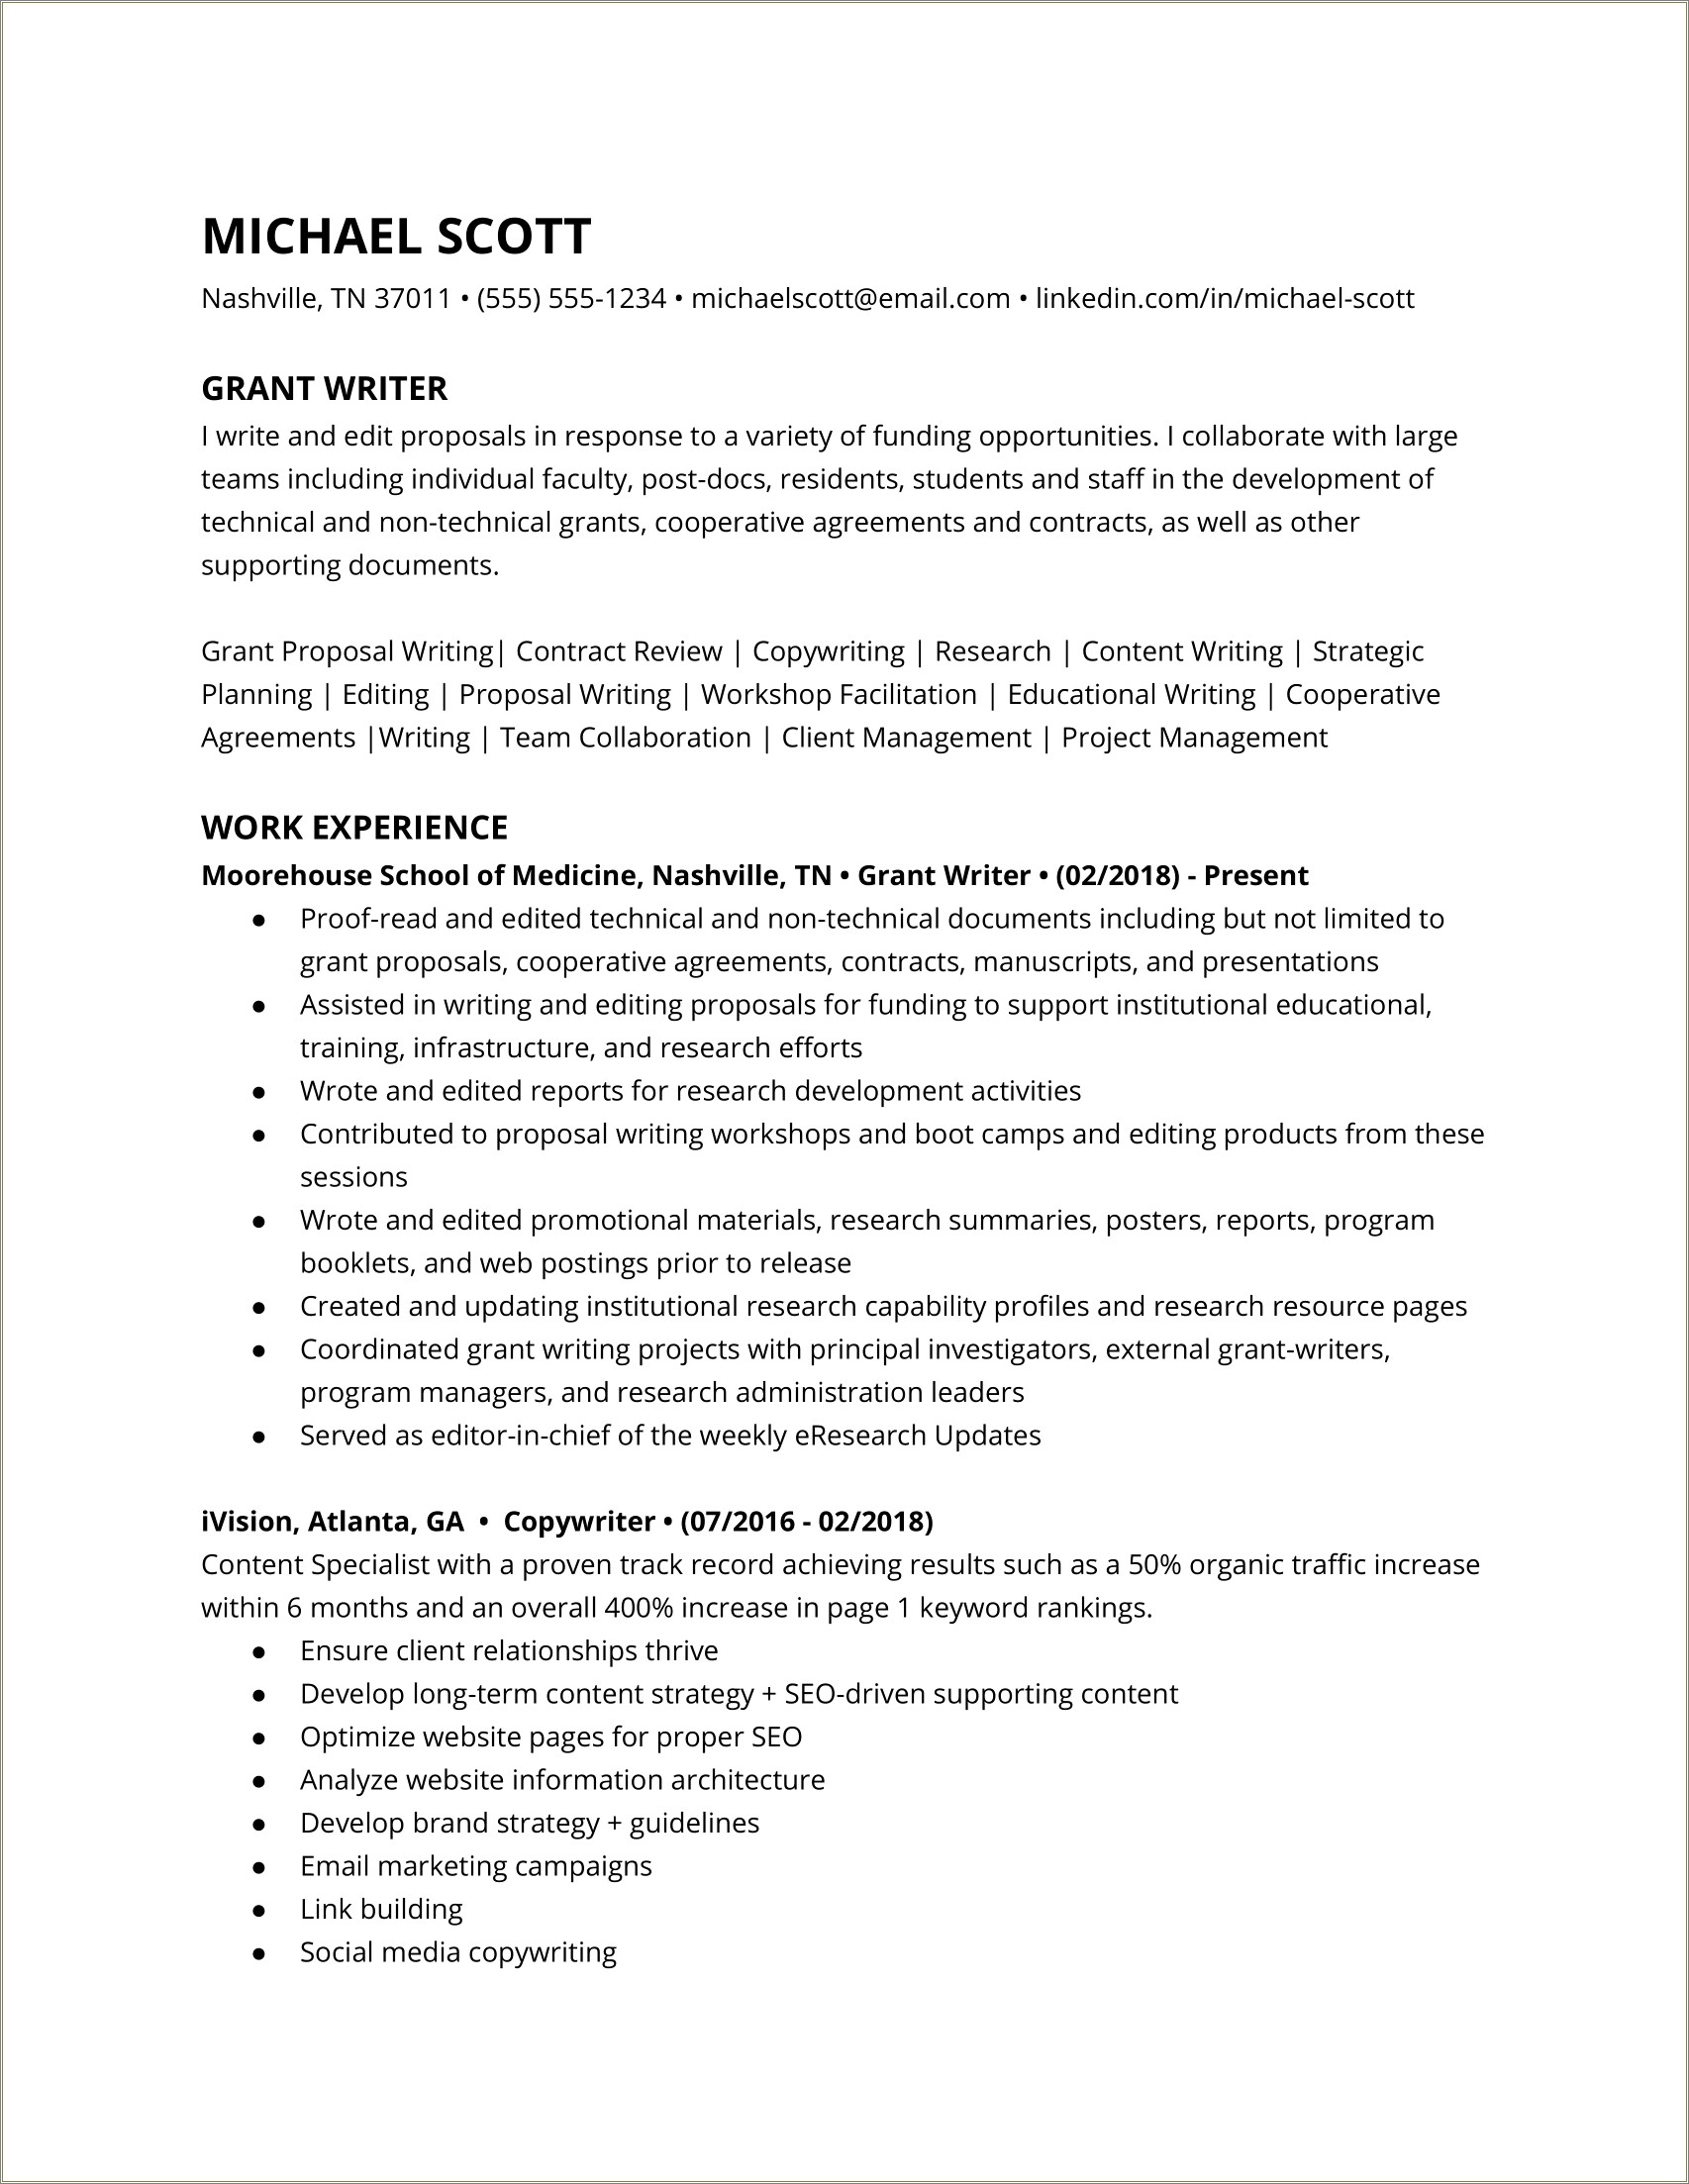 Putting Key Words In Resume In White